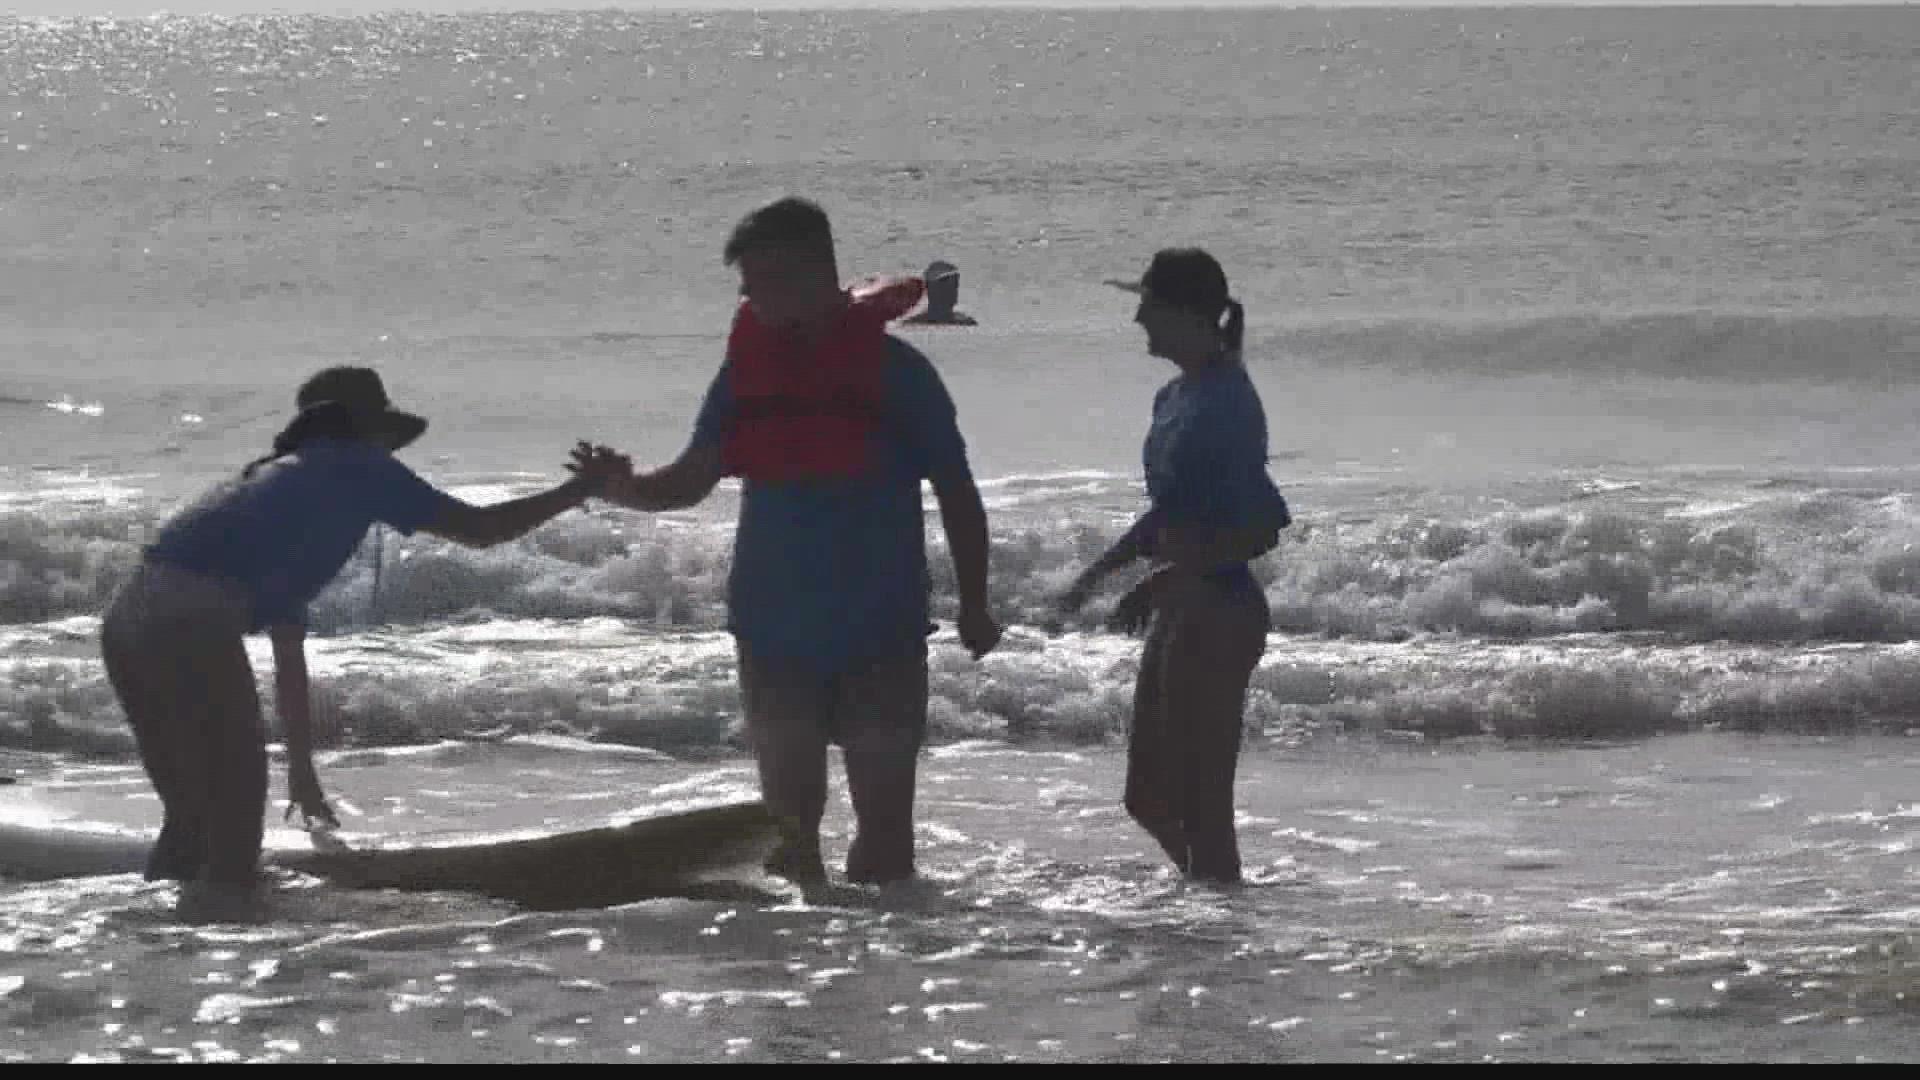 Around one hundred people were on the beach Tuesday cheering and giving high fives to the young people surfing in the HEAL Foundation camp.